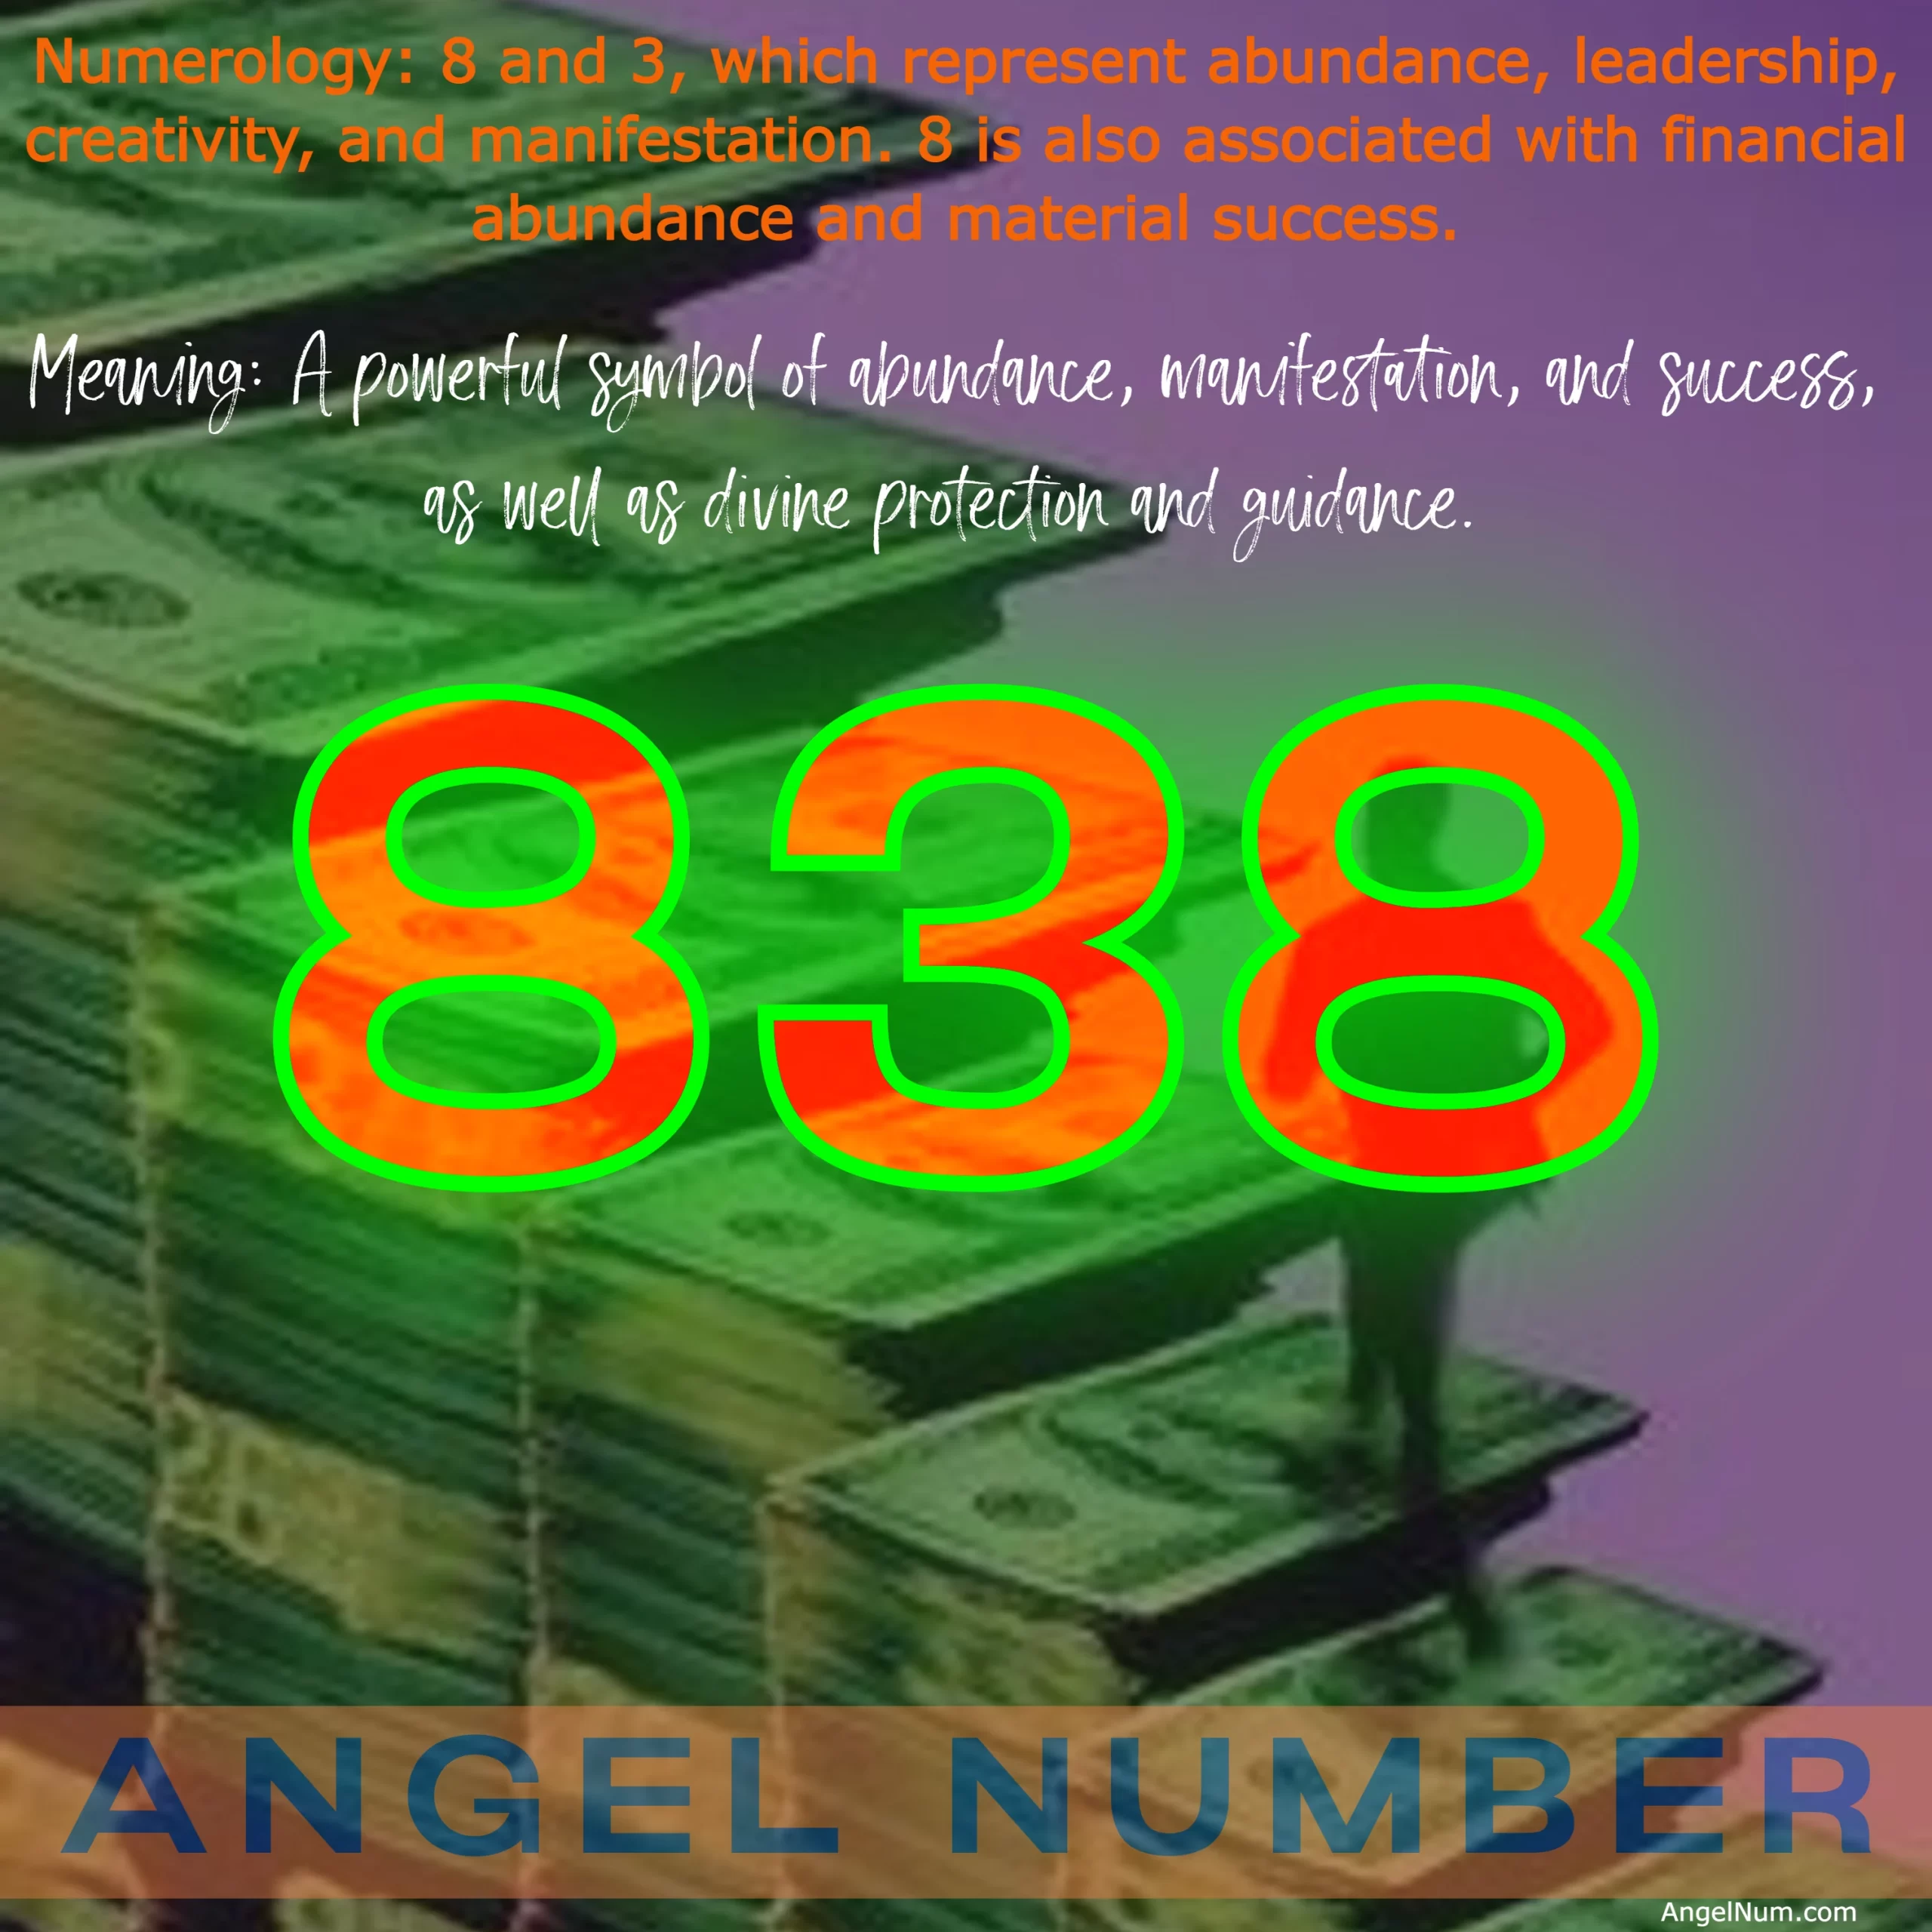 Angel Number 838: Discover the Meaning and Symbolism